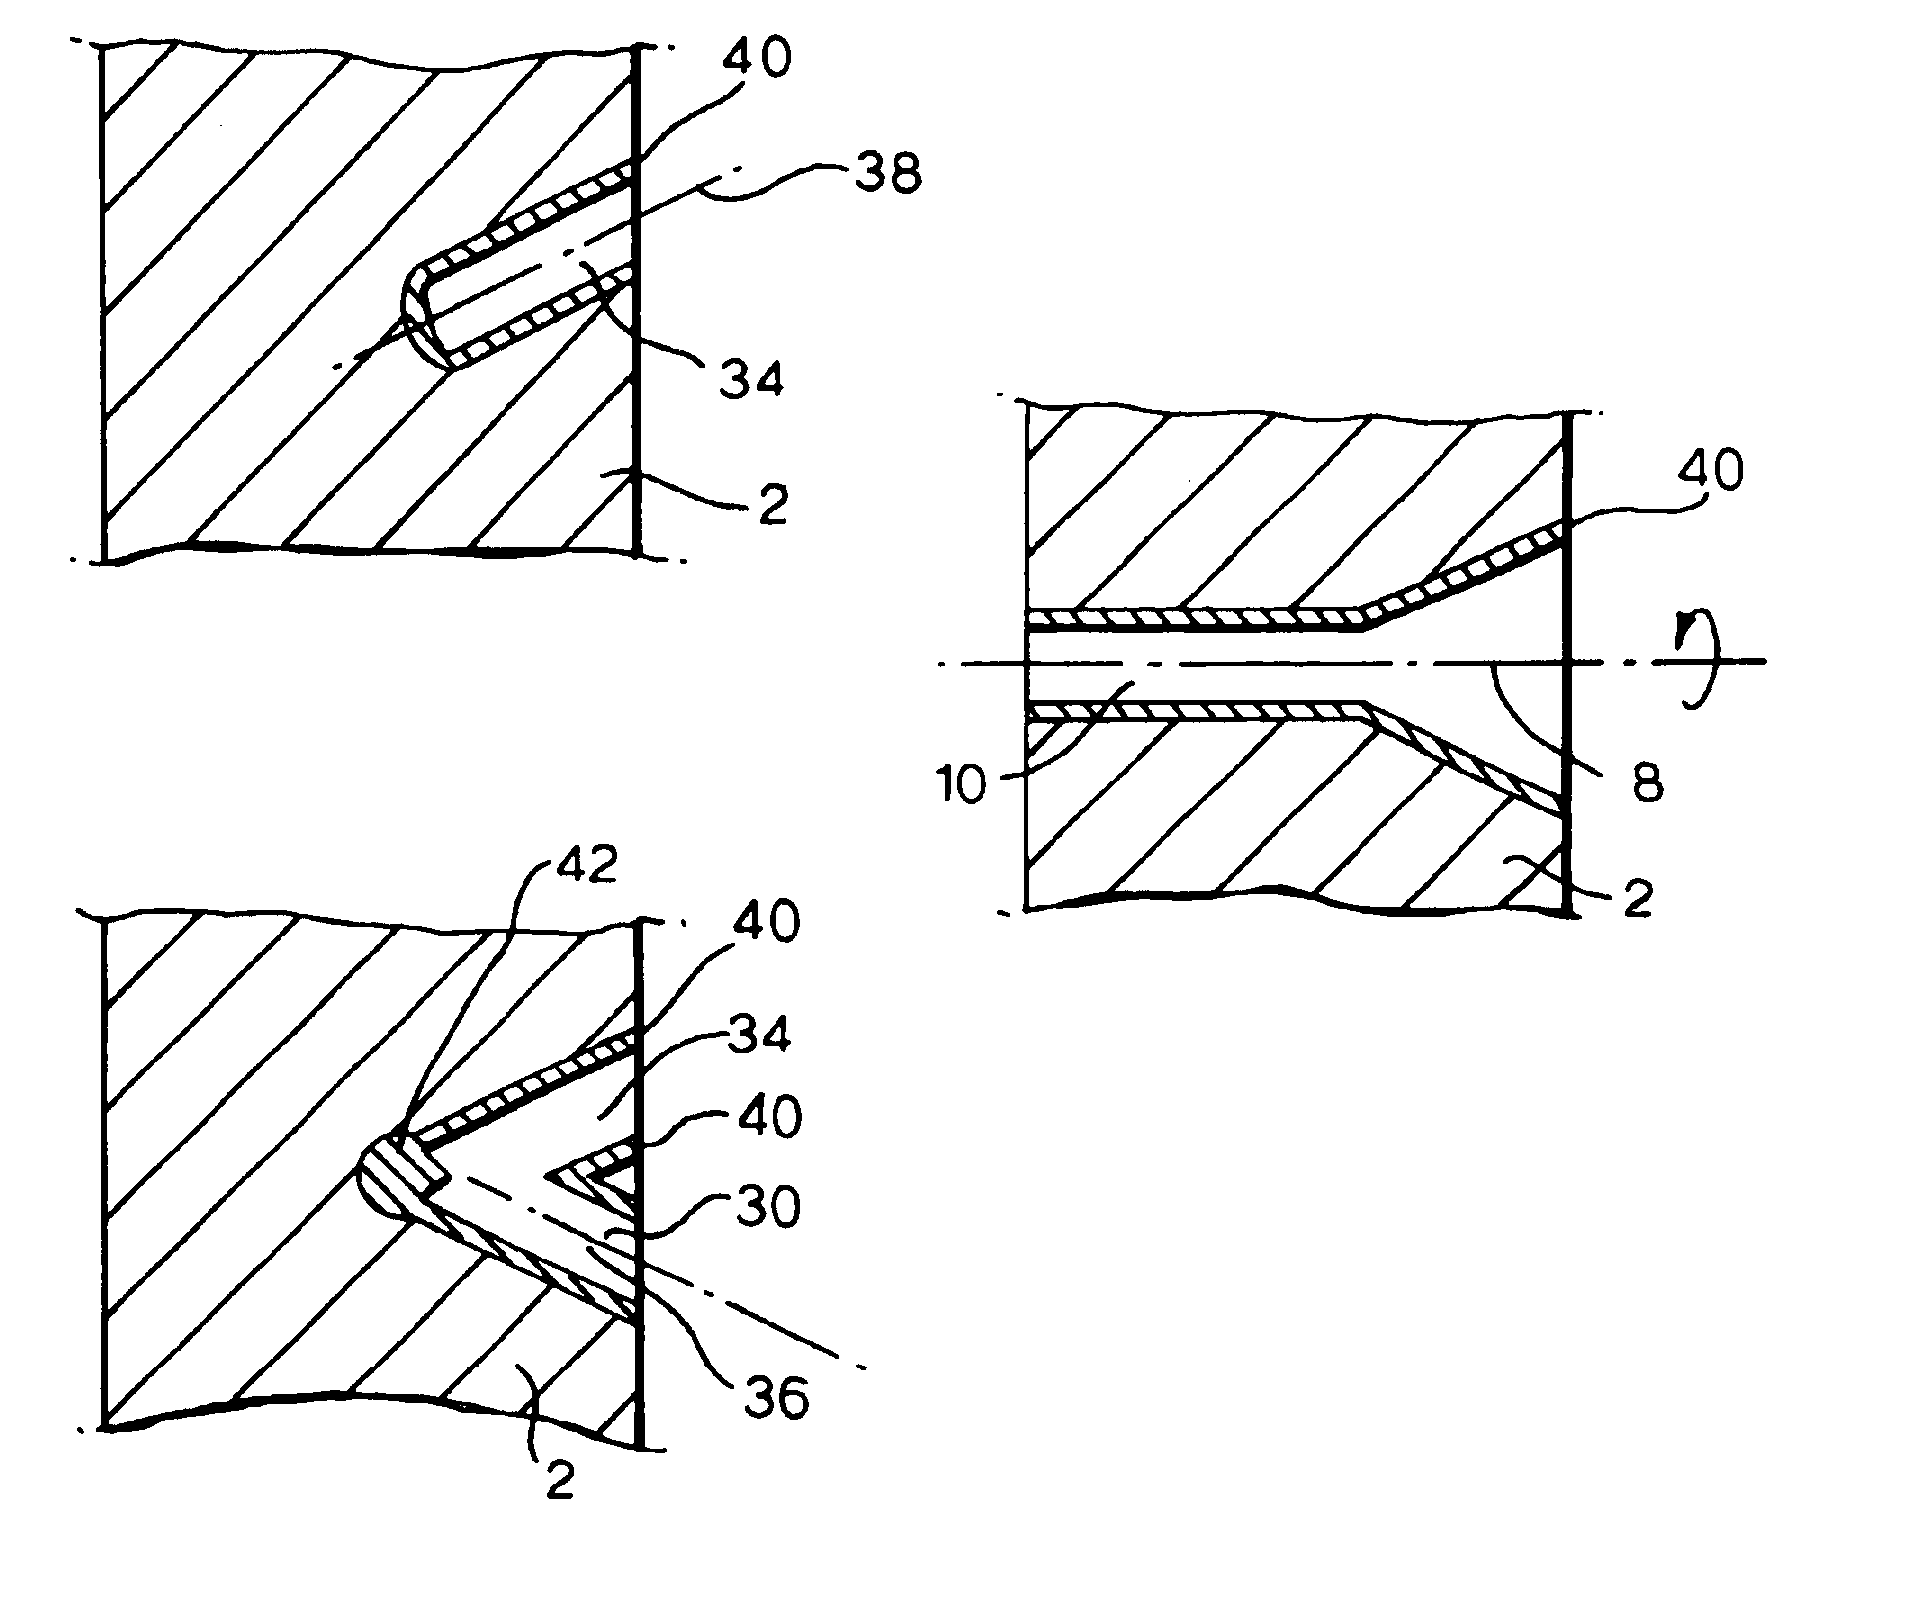 Method of forming a shaped hole